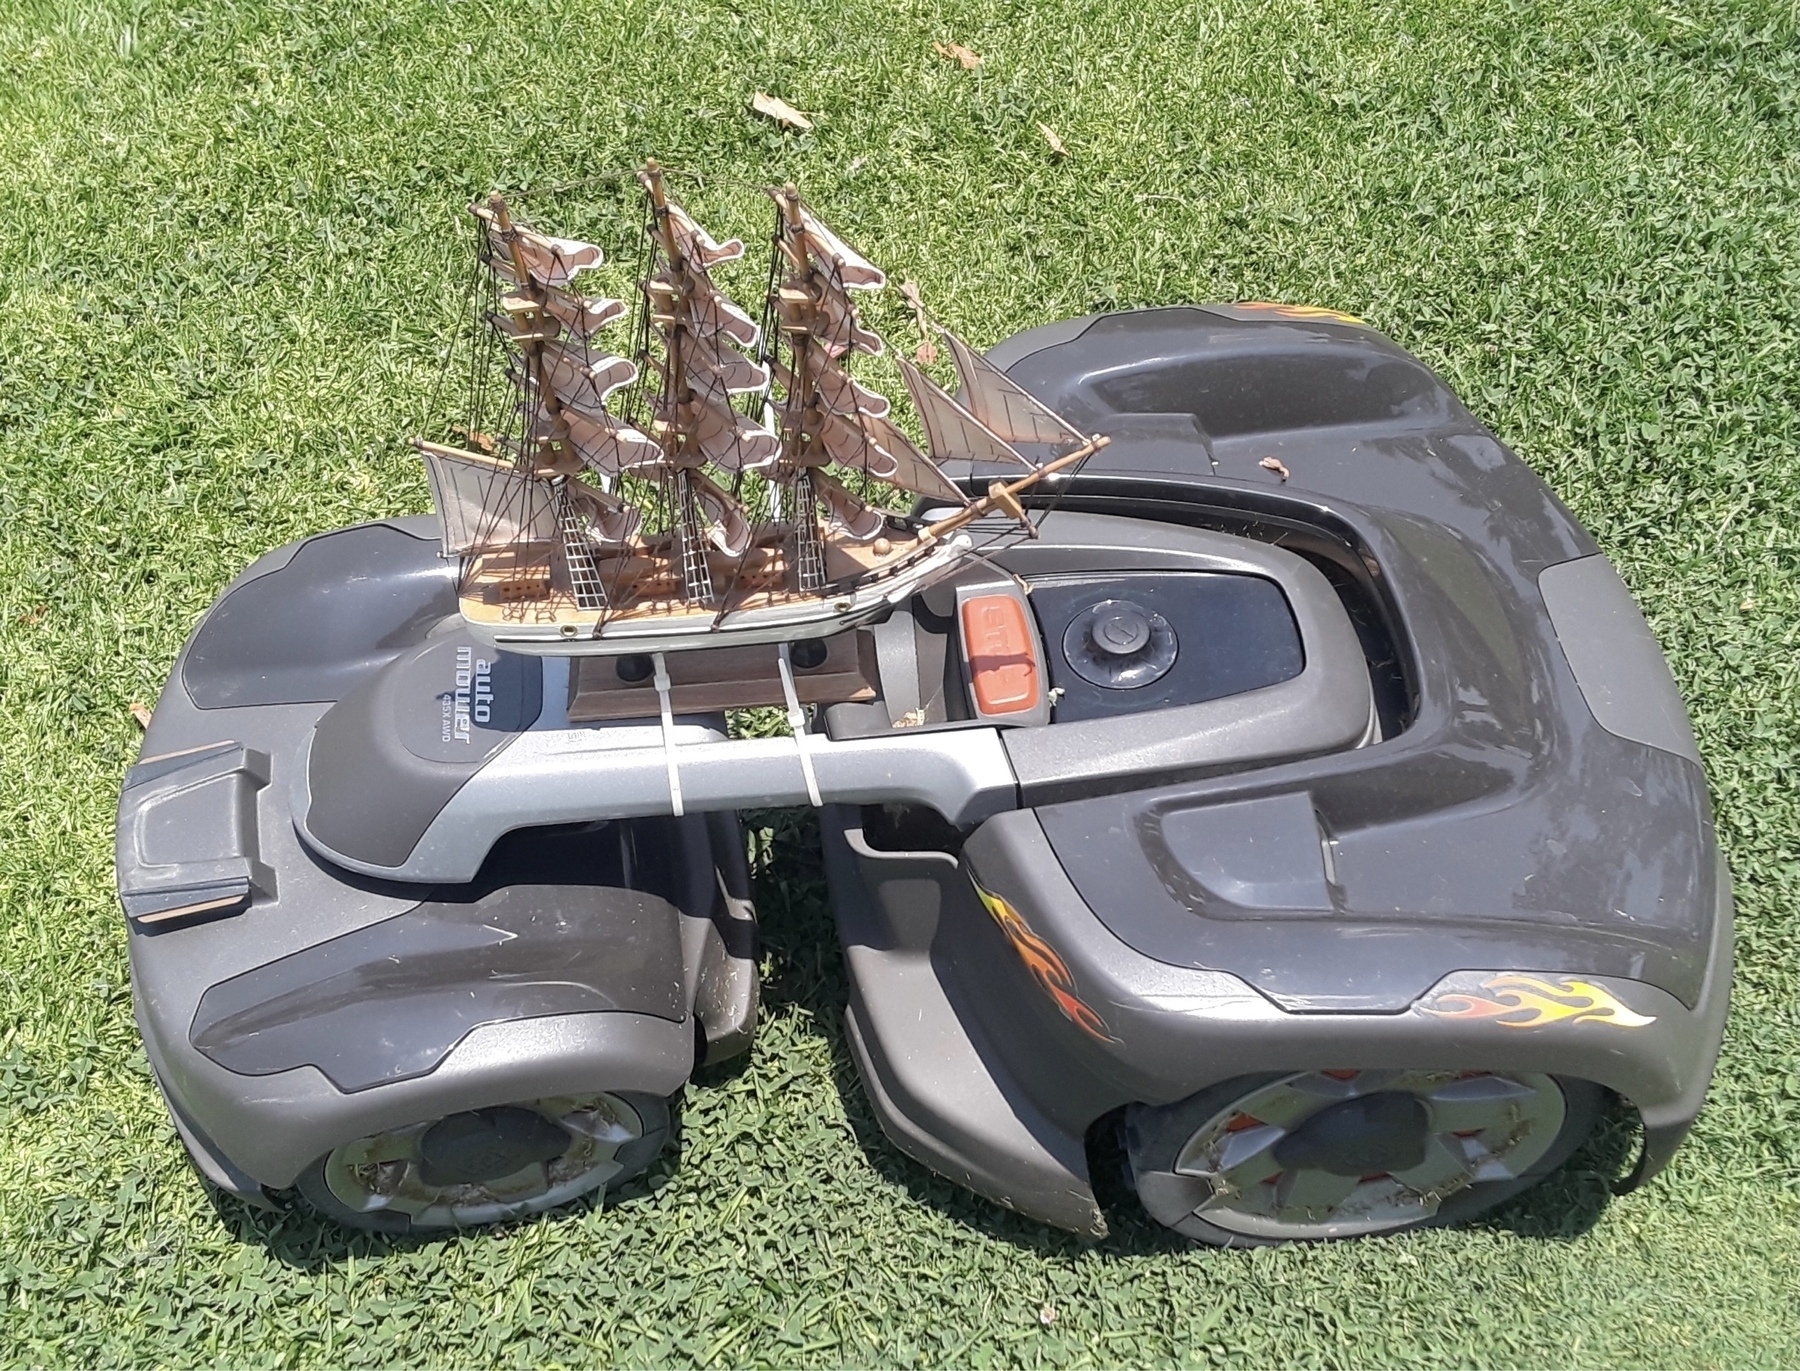 Close up view of a gray lawn mowing robot with a small model sailing ship attached to the top.